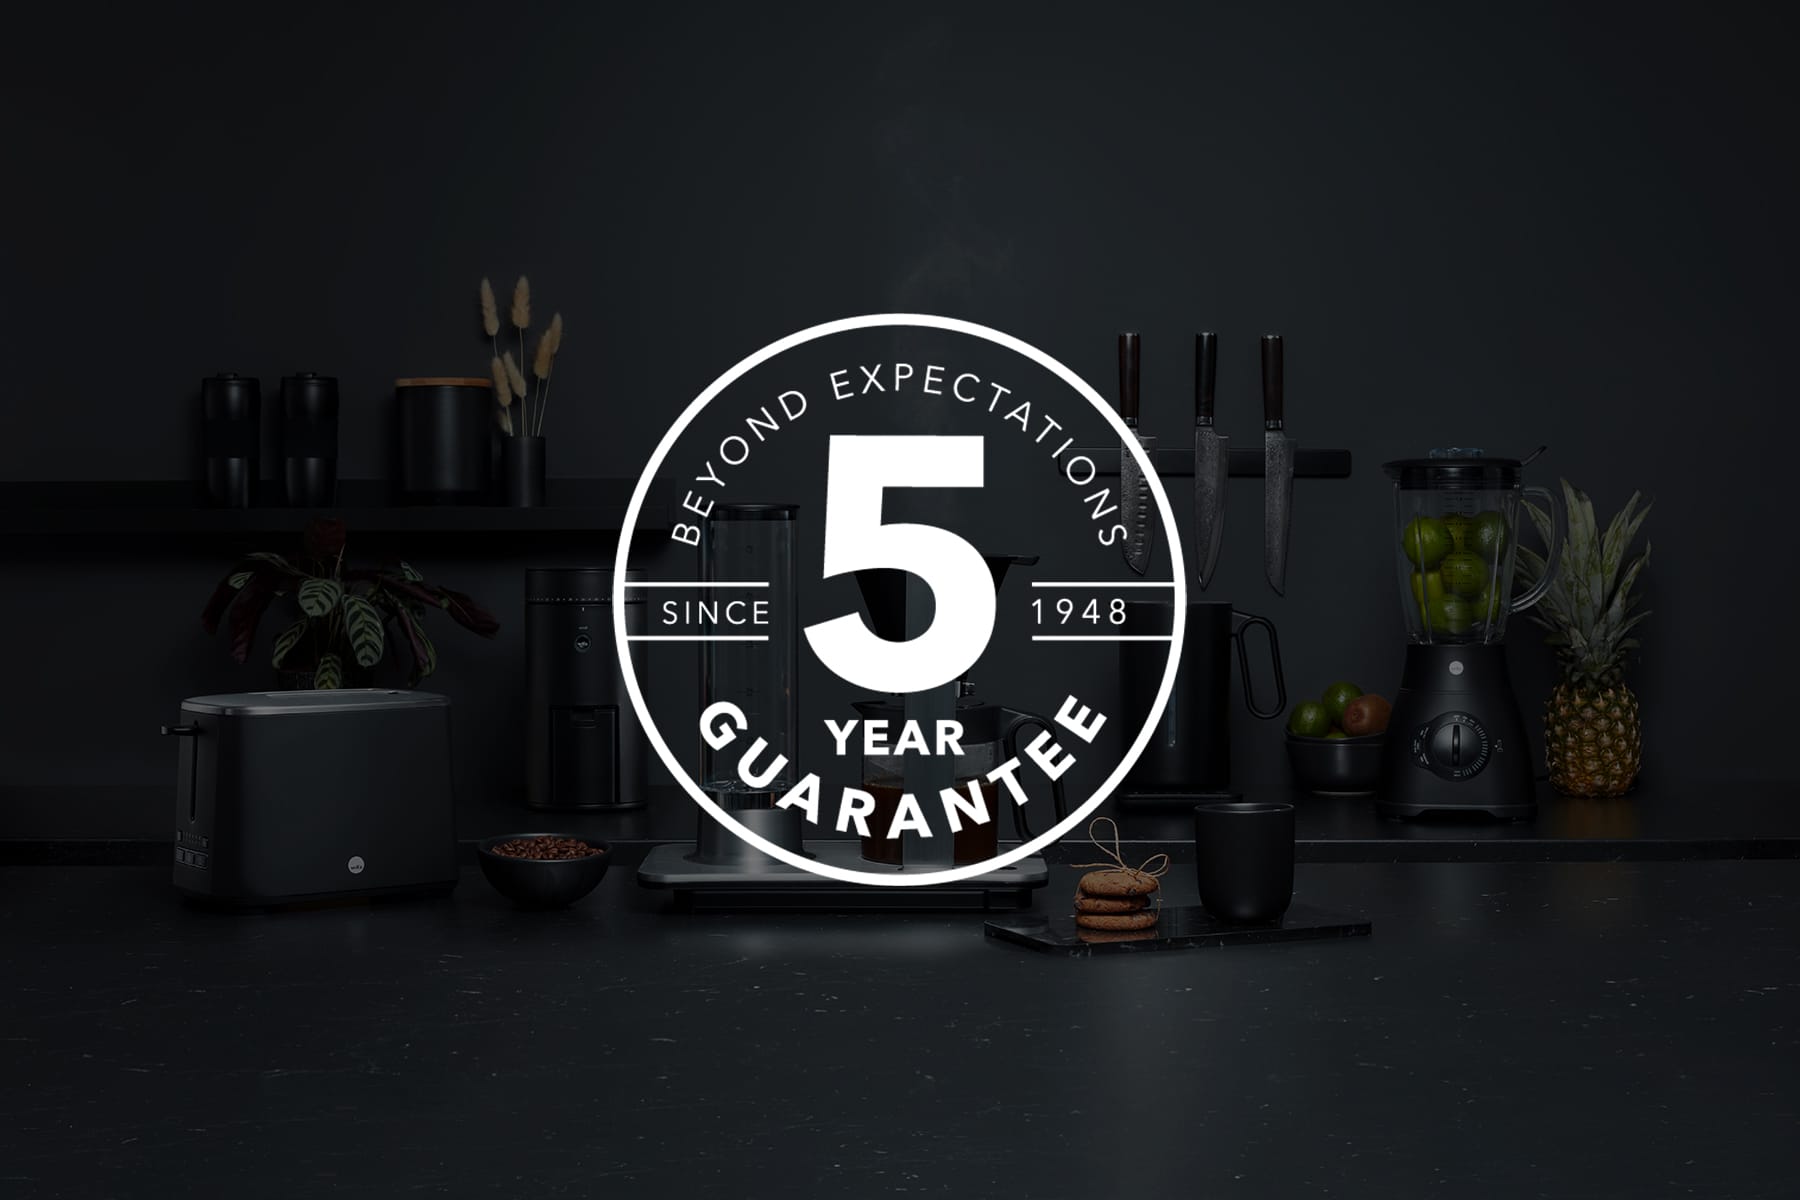 Wilfa Coffee and Kitchen Equipment with an impressive 5 year warranty.